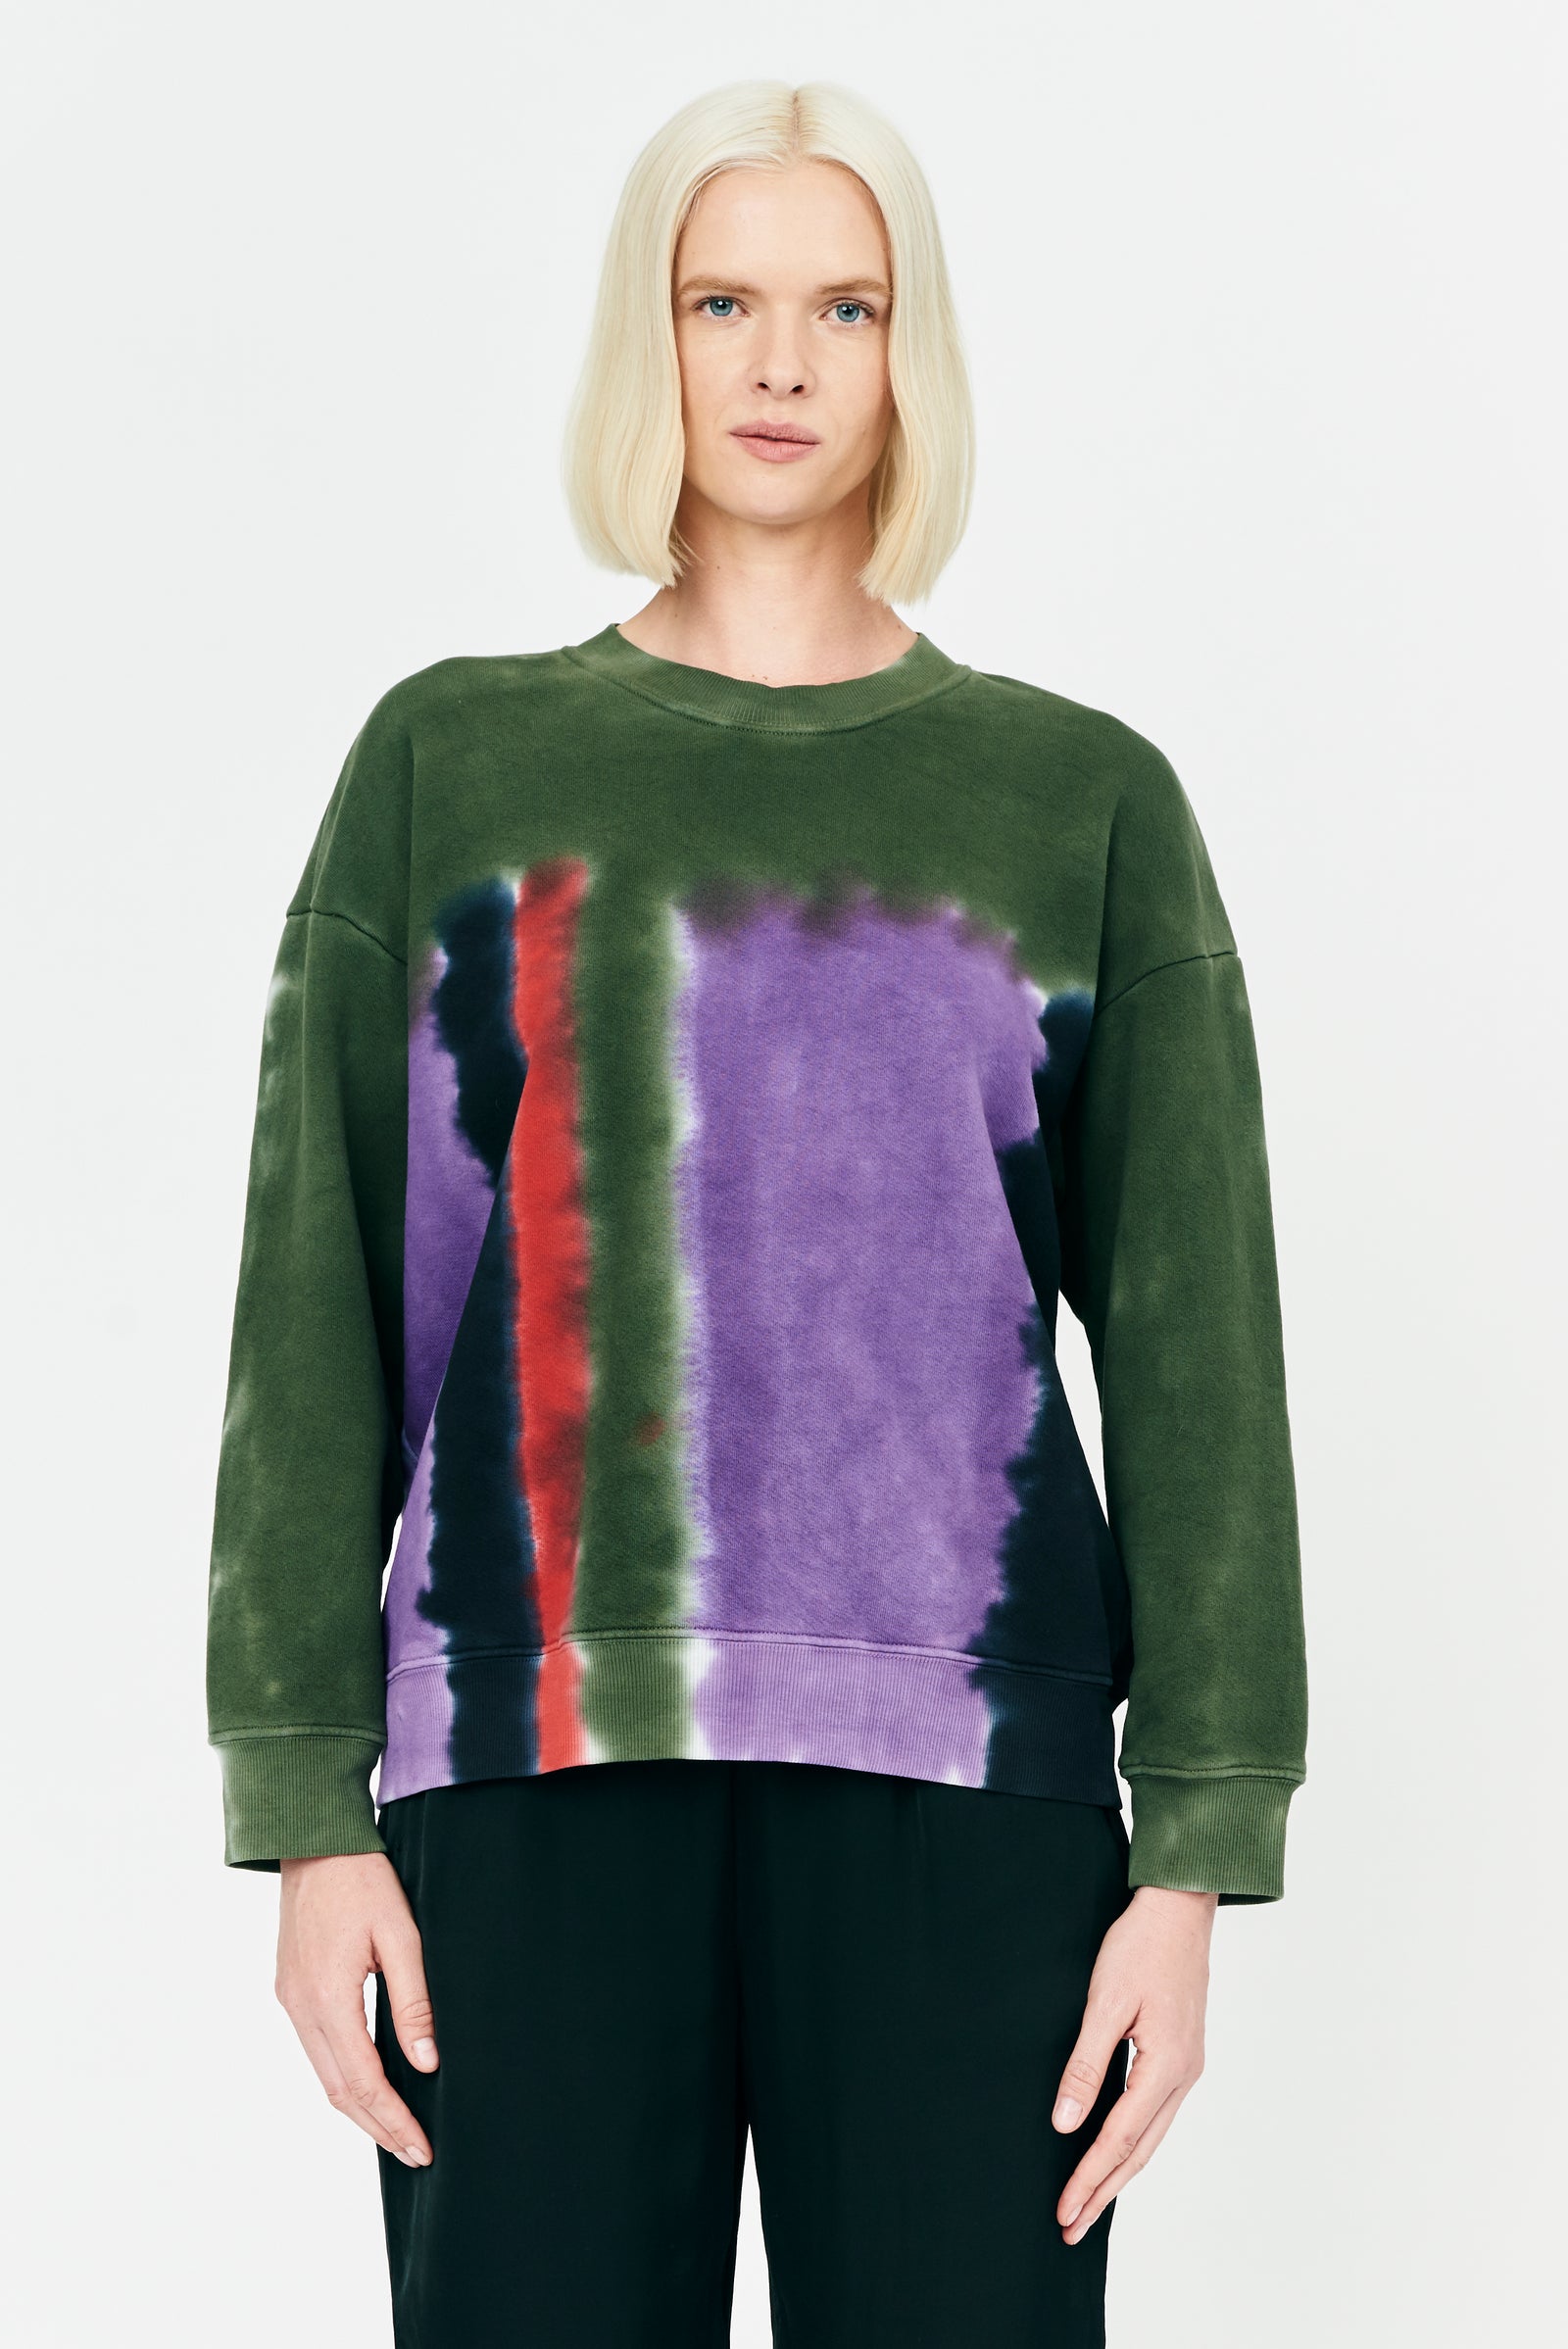 Modernist Tie Dye Painted Baby Rib and Fleece Drop Shoulder Sweatshirt Front Close-Up View